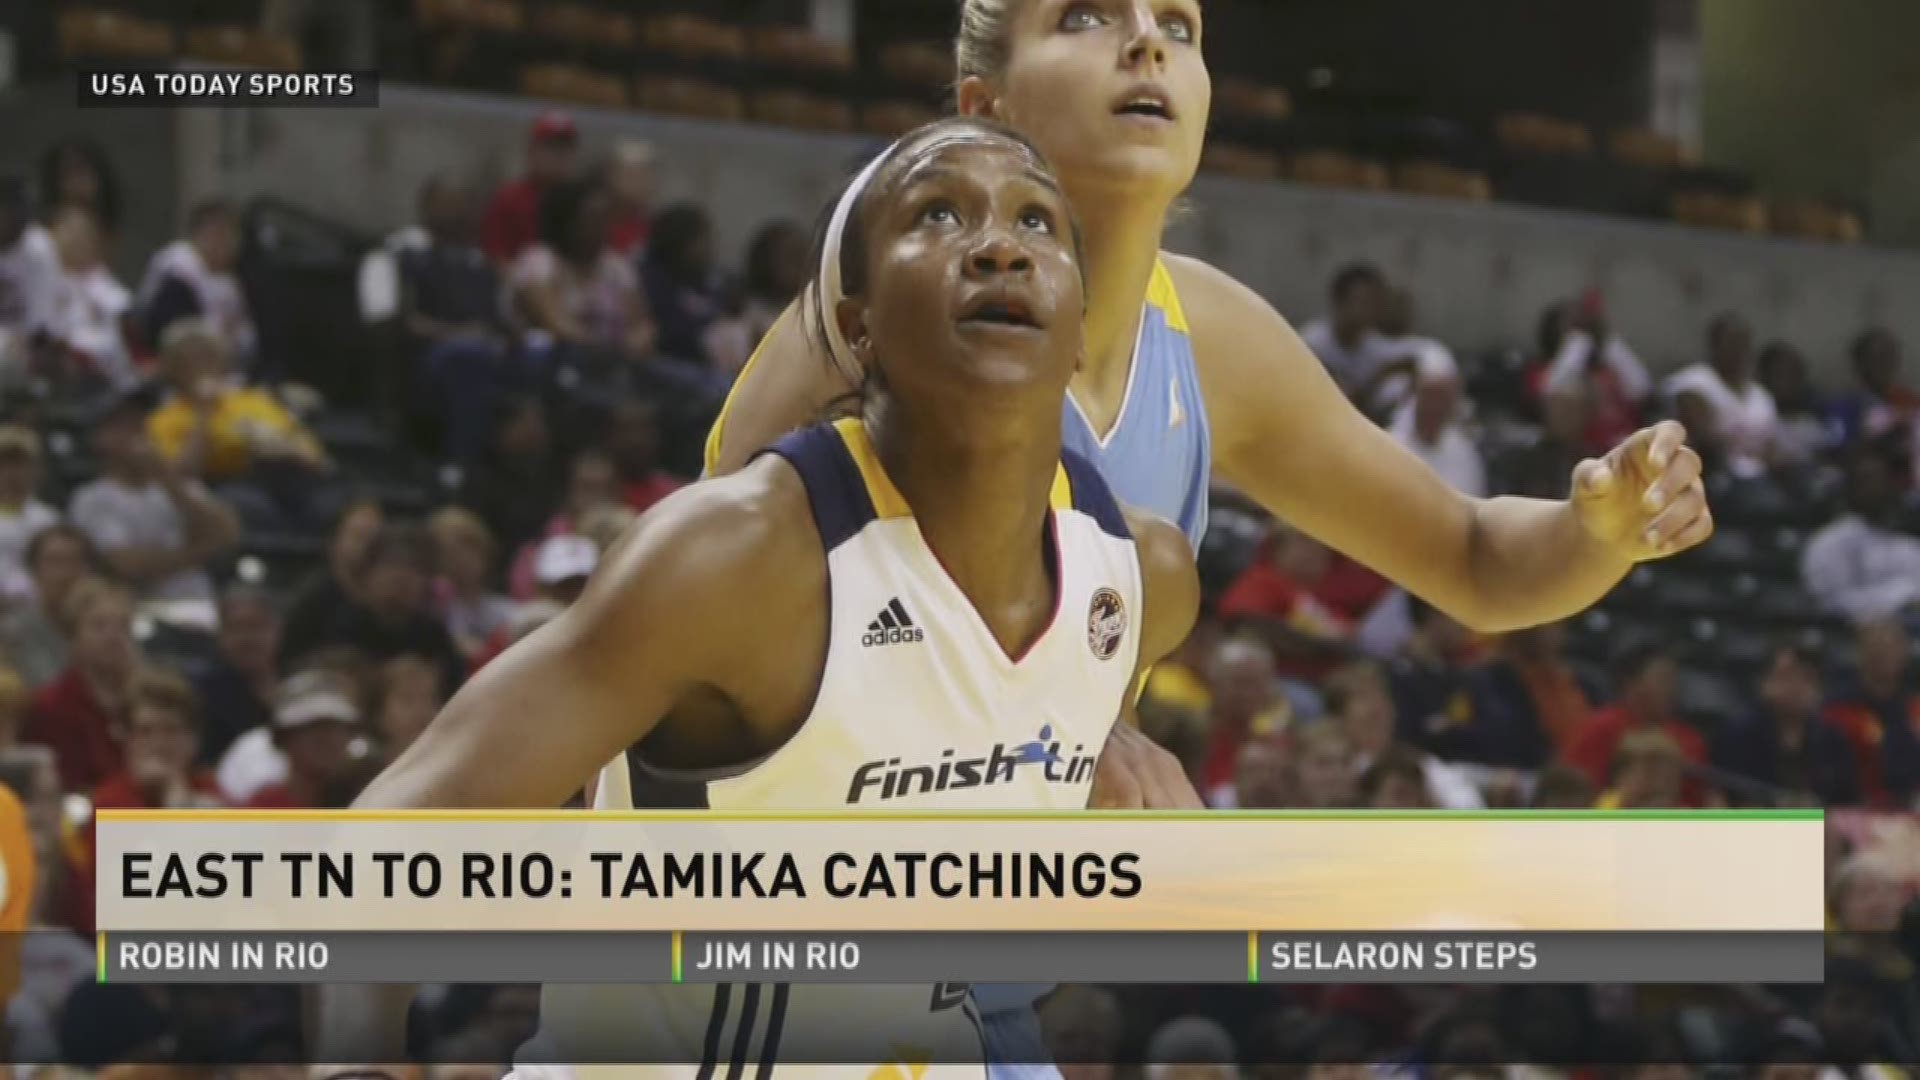 Catchings plays for the Indiana Fever in the WNBA.